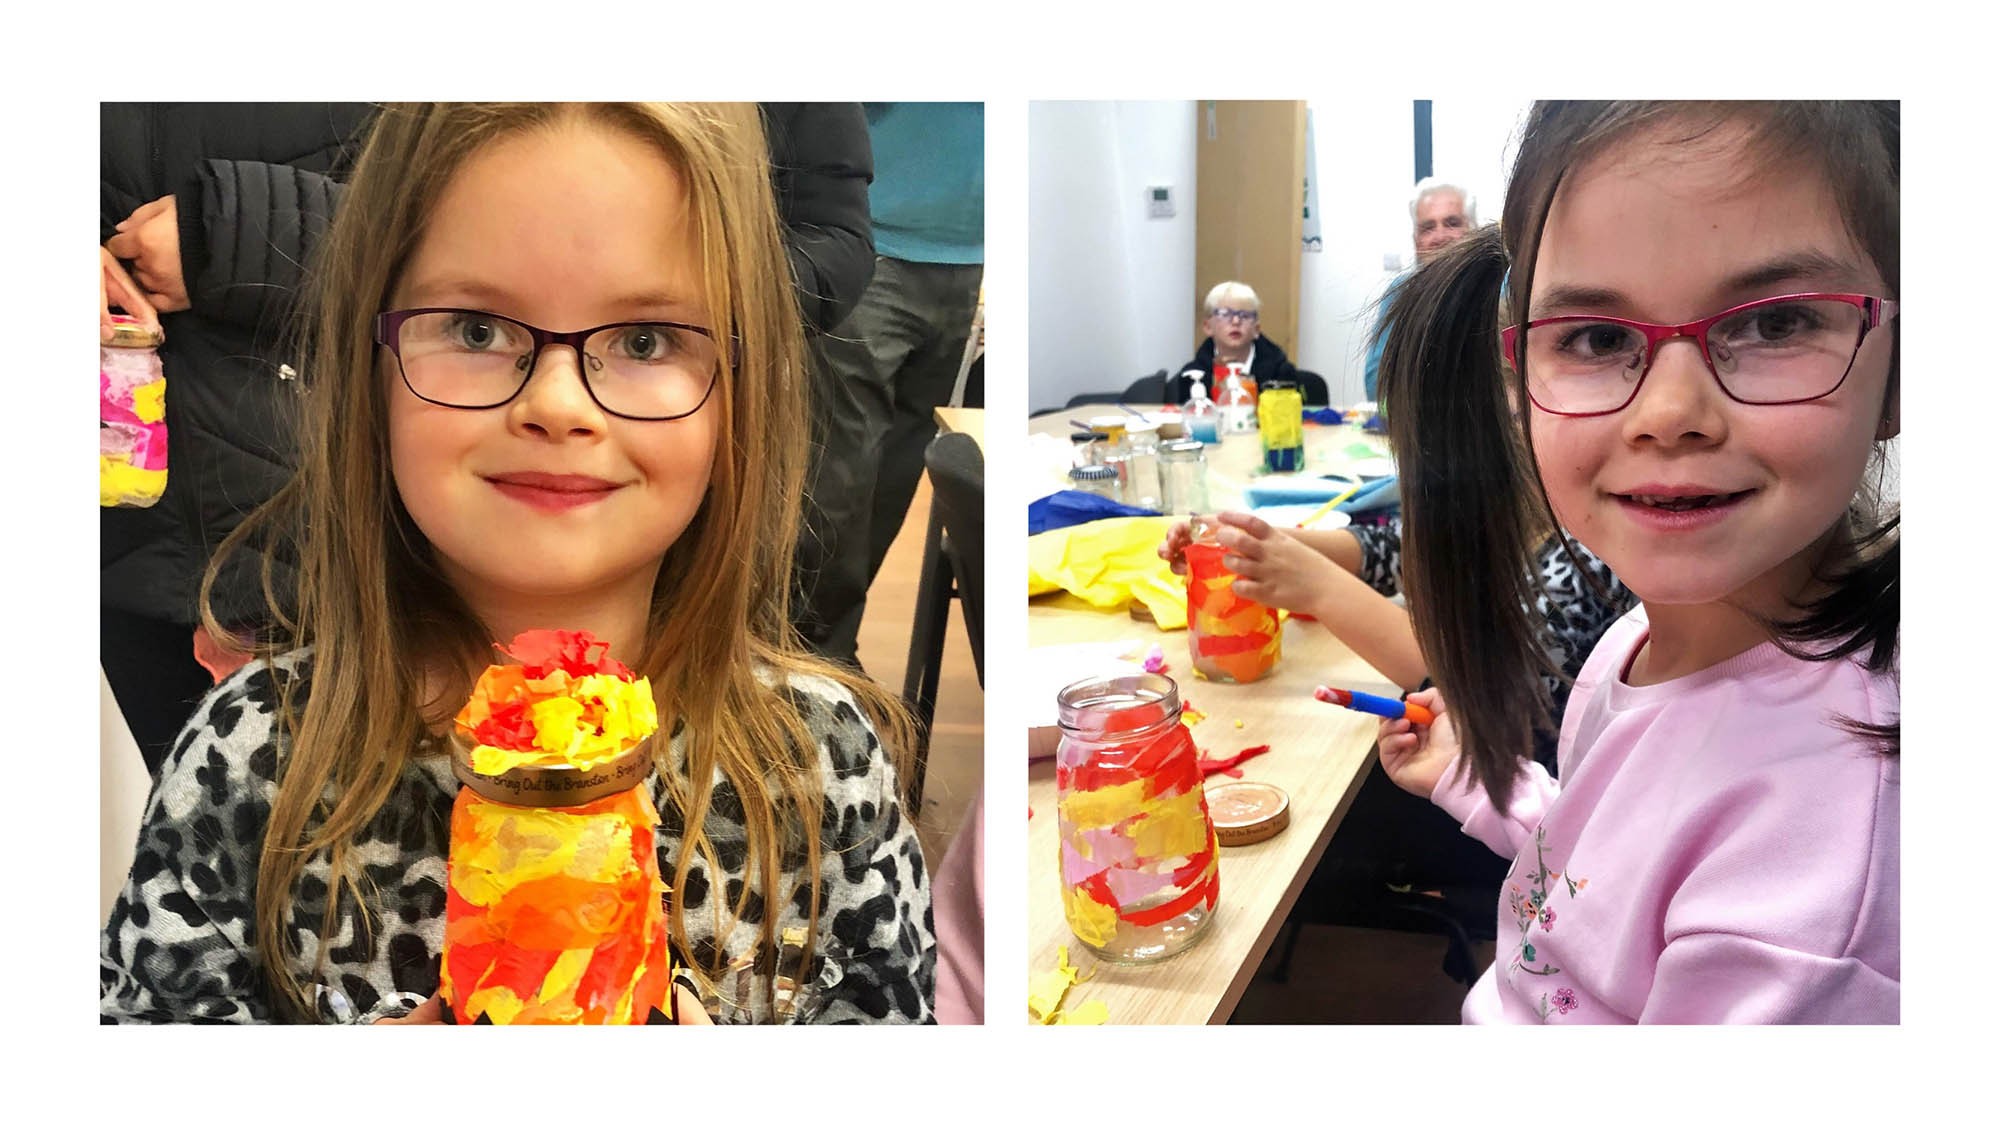 A lantern making craft activity for young carers, run by charity Caring Together.